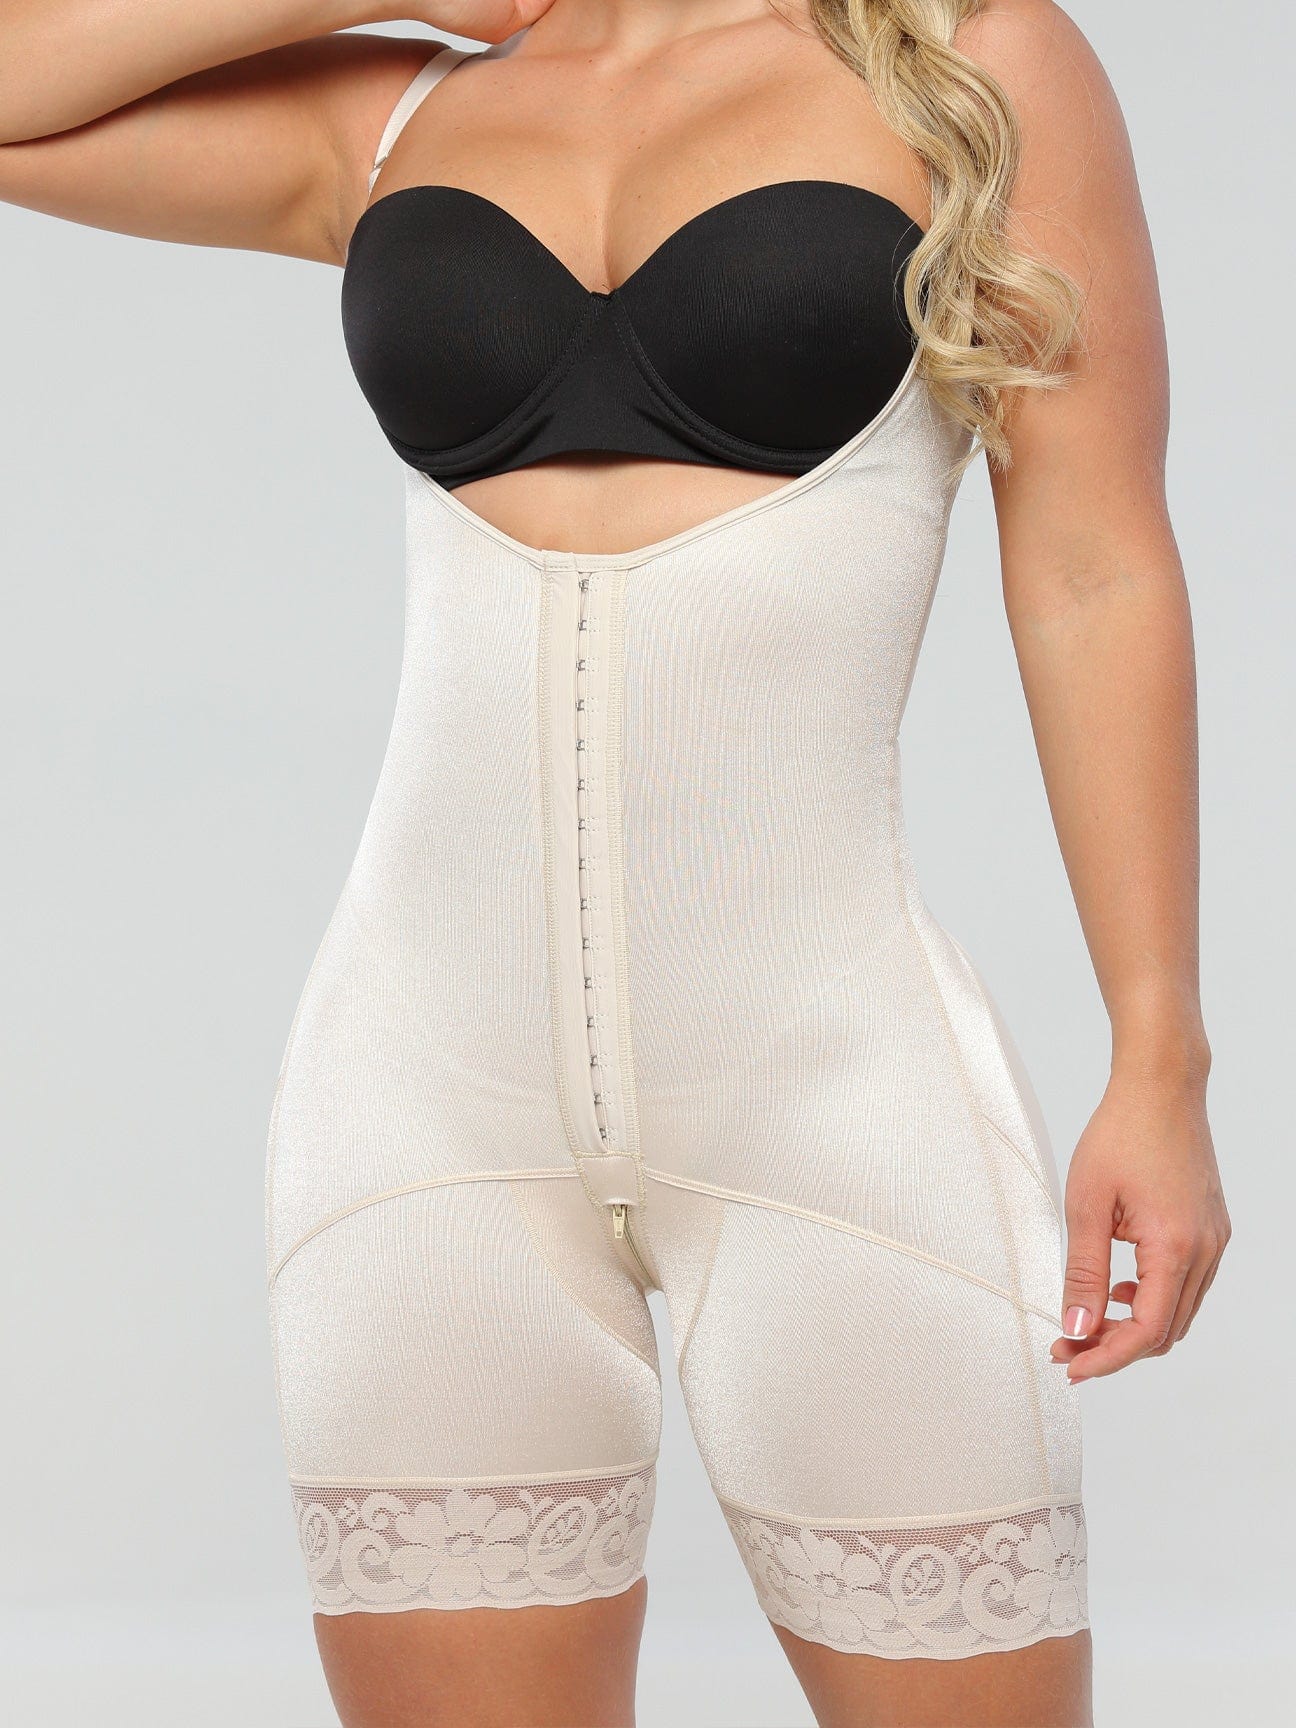 Smooth Compression Faja For Comfort with Hooks CB453